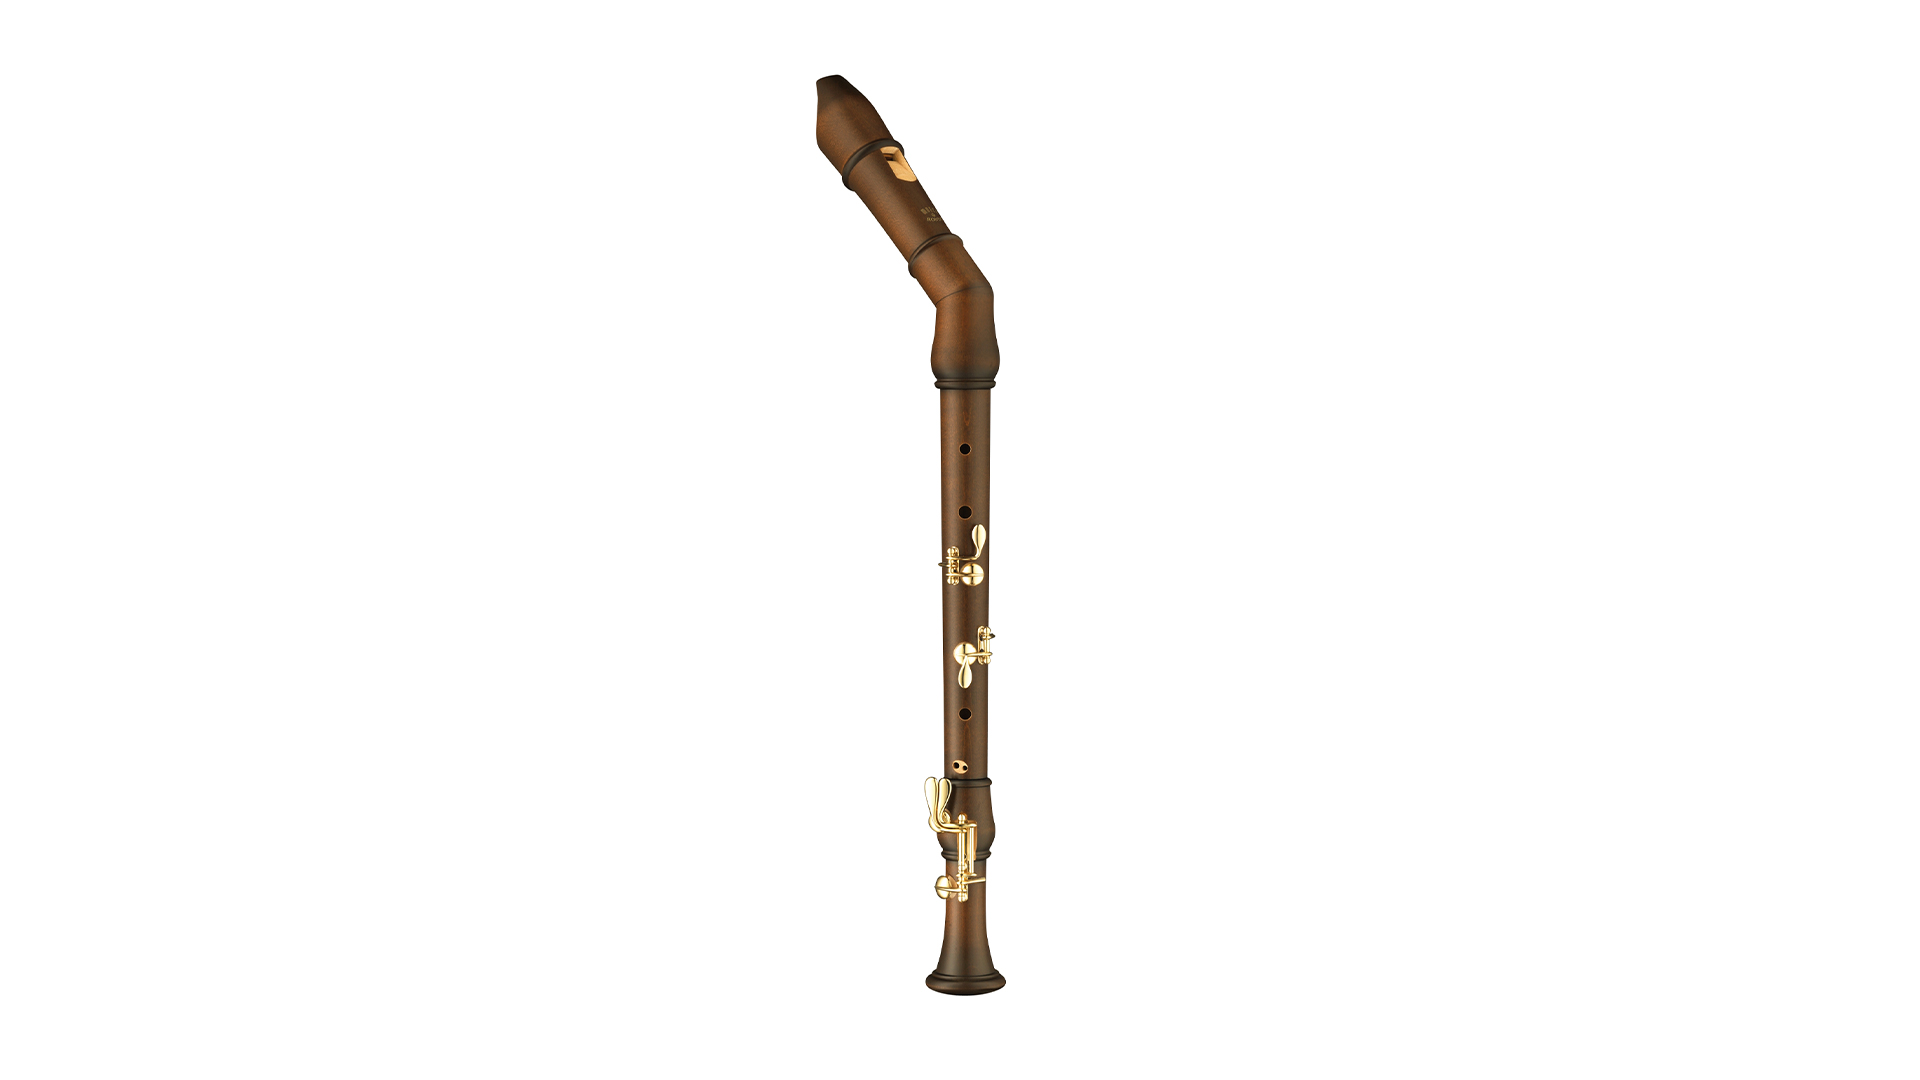 Moeck, "Flauto Rondo", bent tenor plus in c', baroque double hole, with double key and middle piece